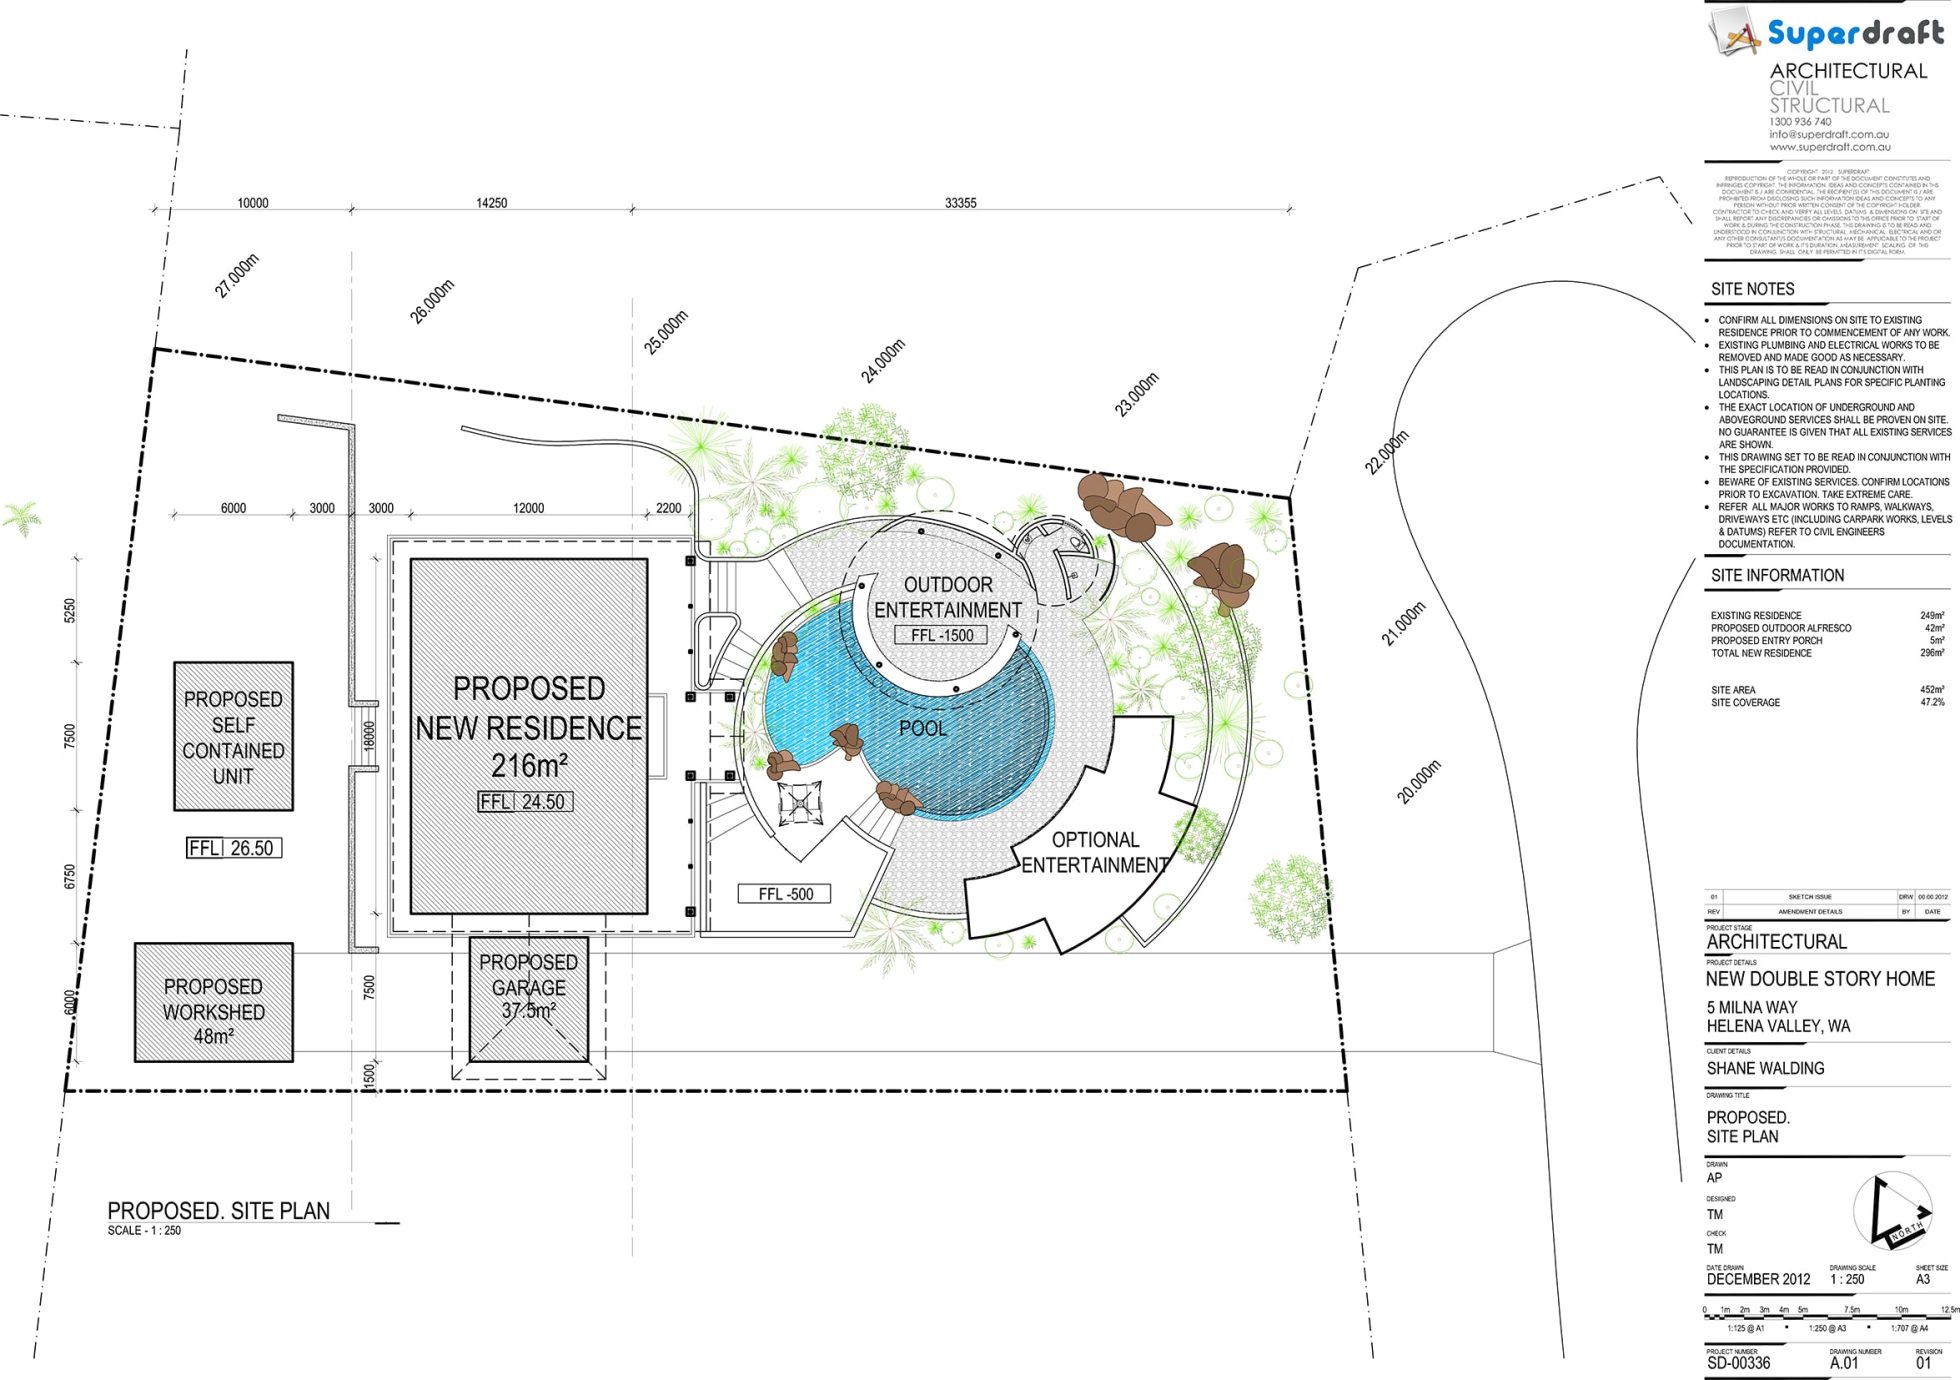 site plan for a terraced house in helena valley